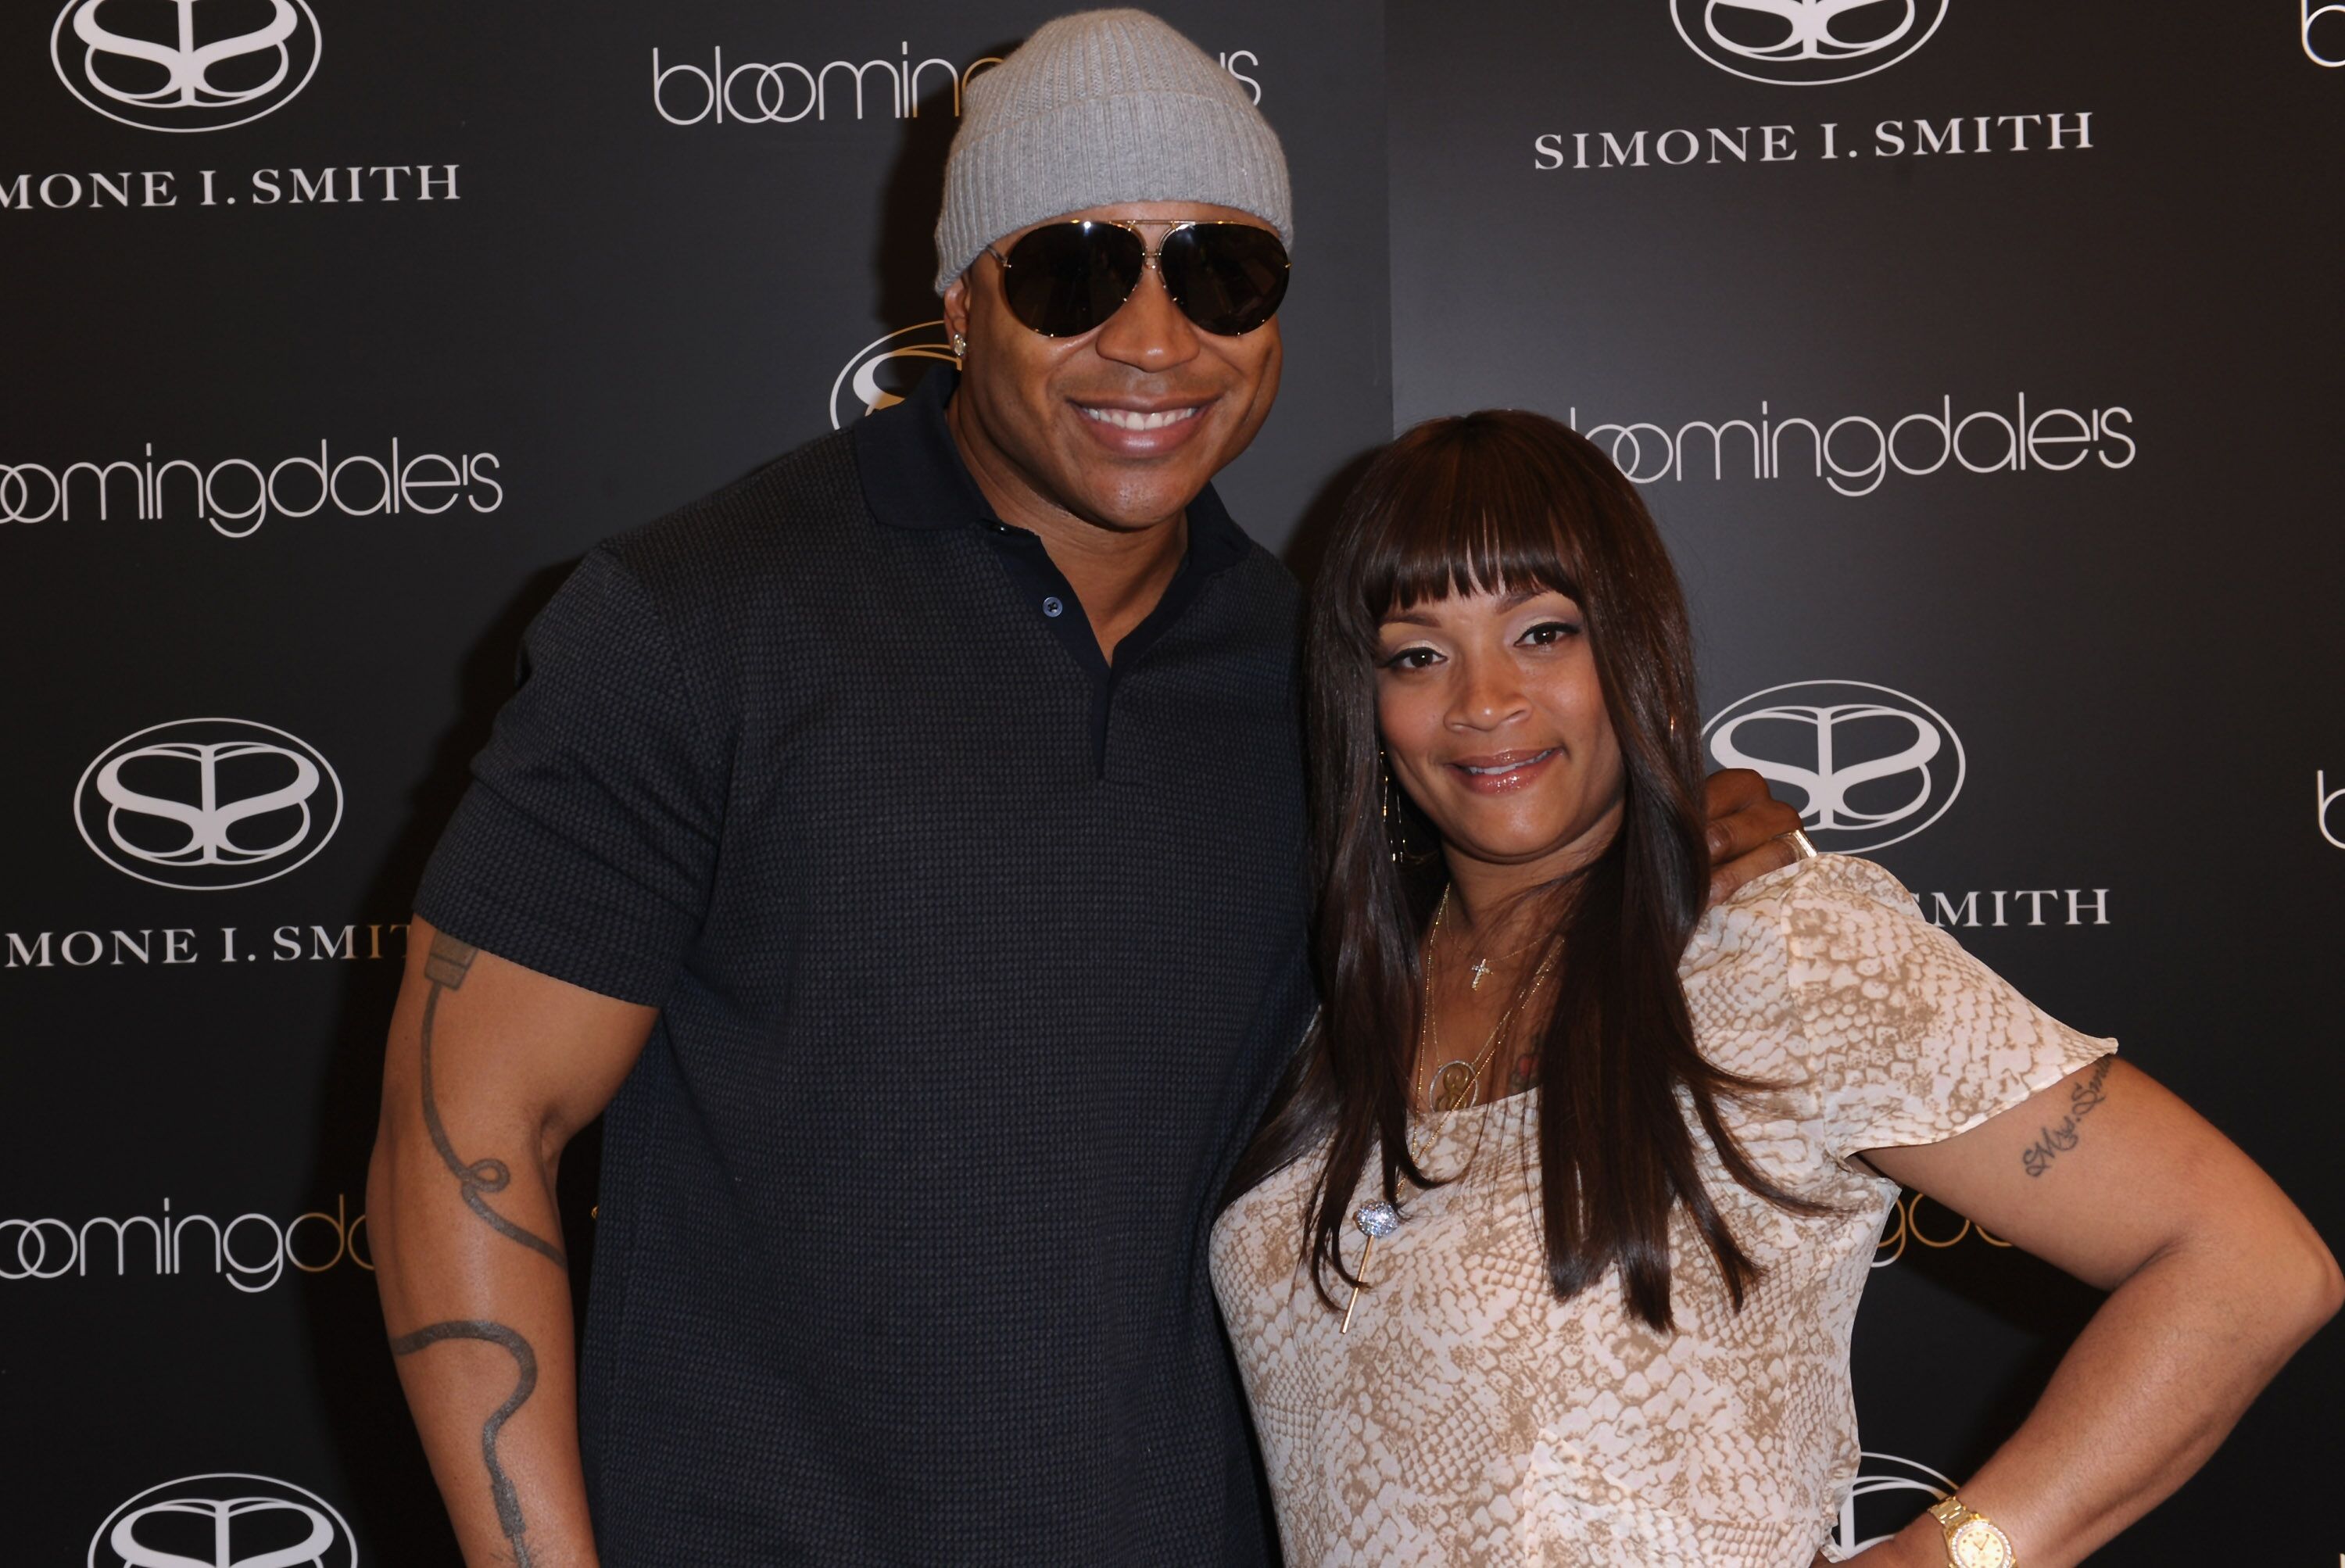 LL Cool J and designer Simone I. Smith at a personal appearance at Bloomingdale's in California in 2011 | Source: Getty Images